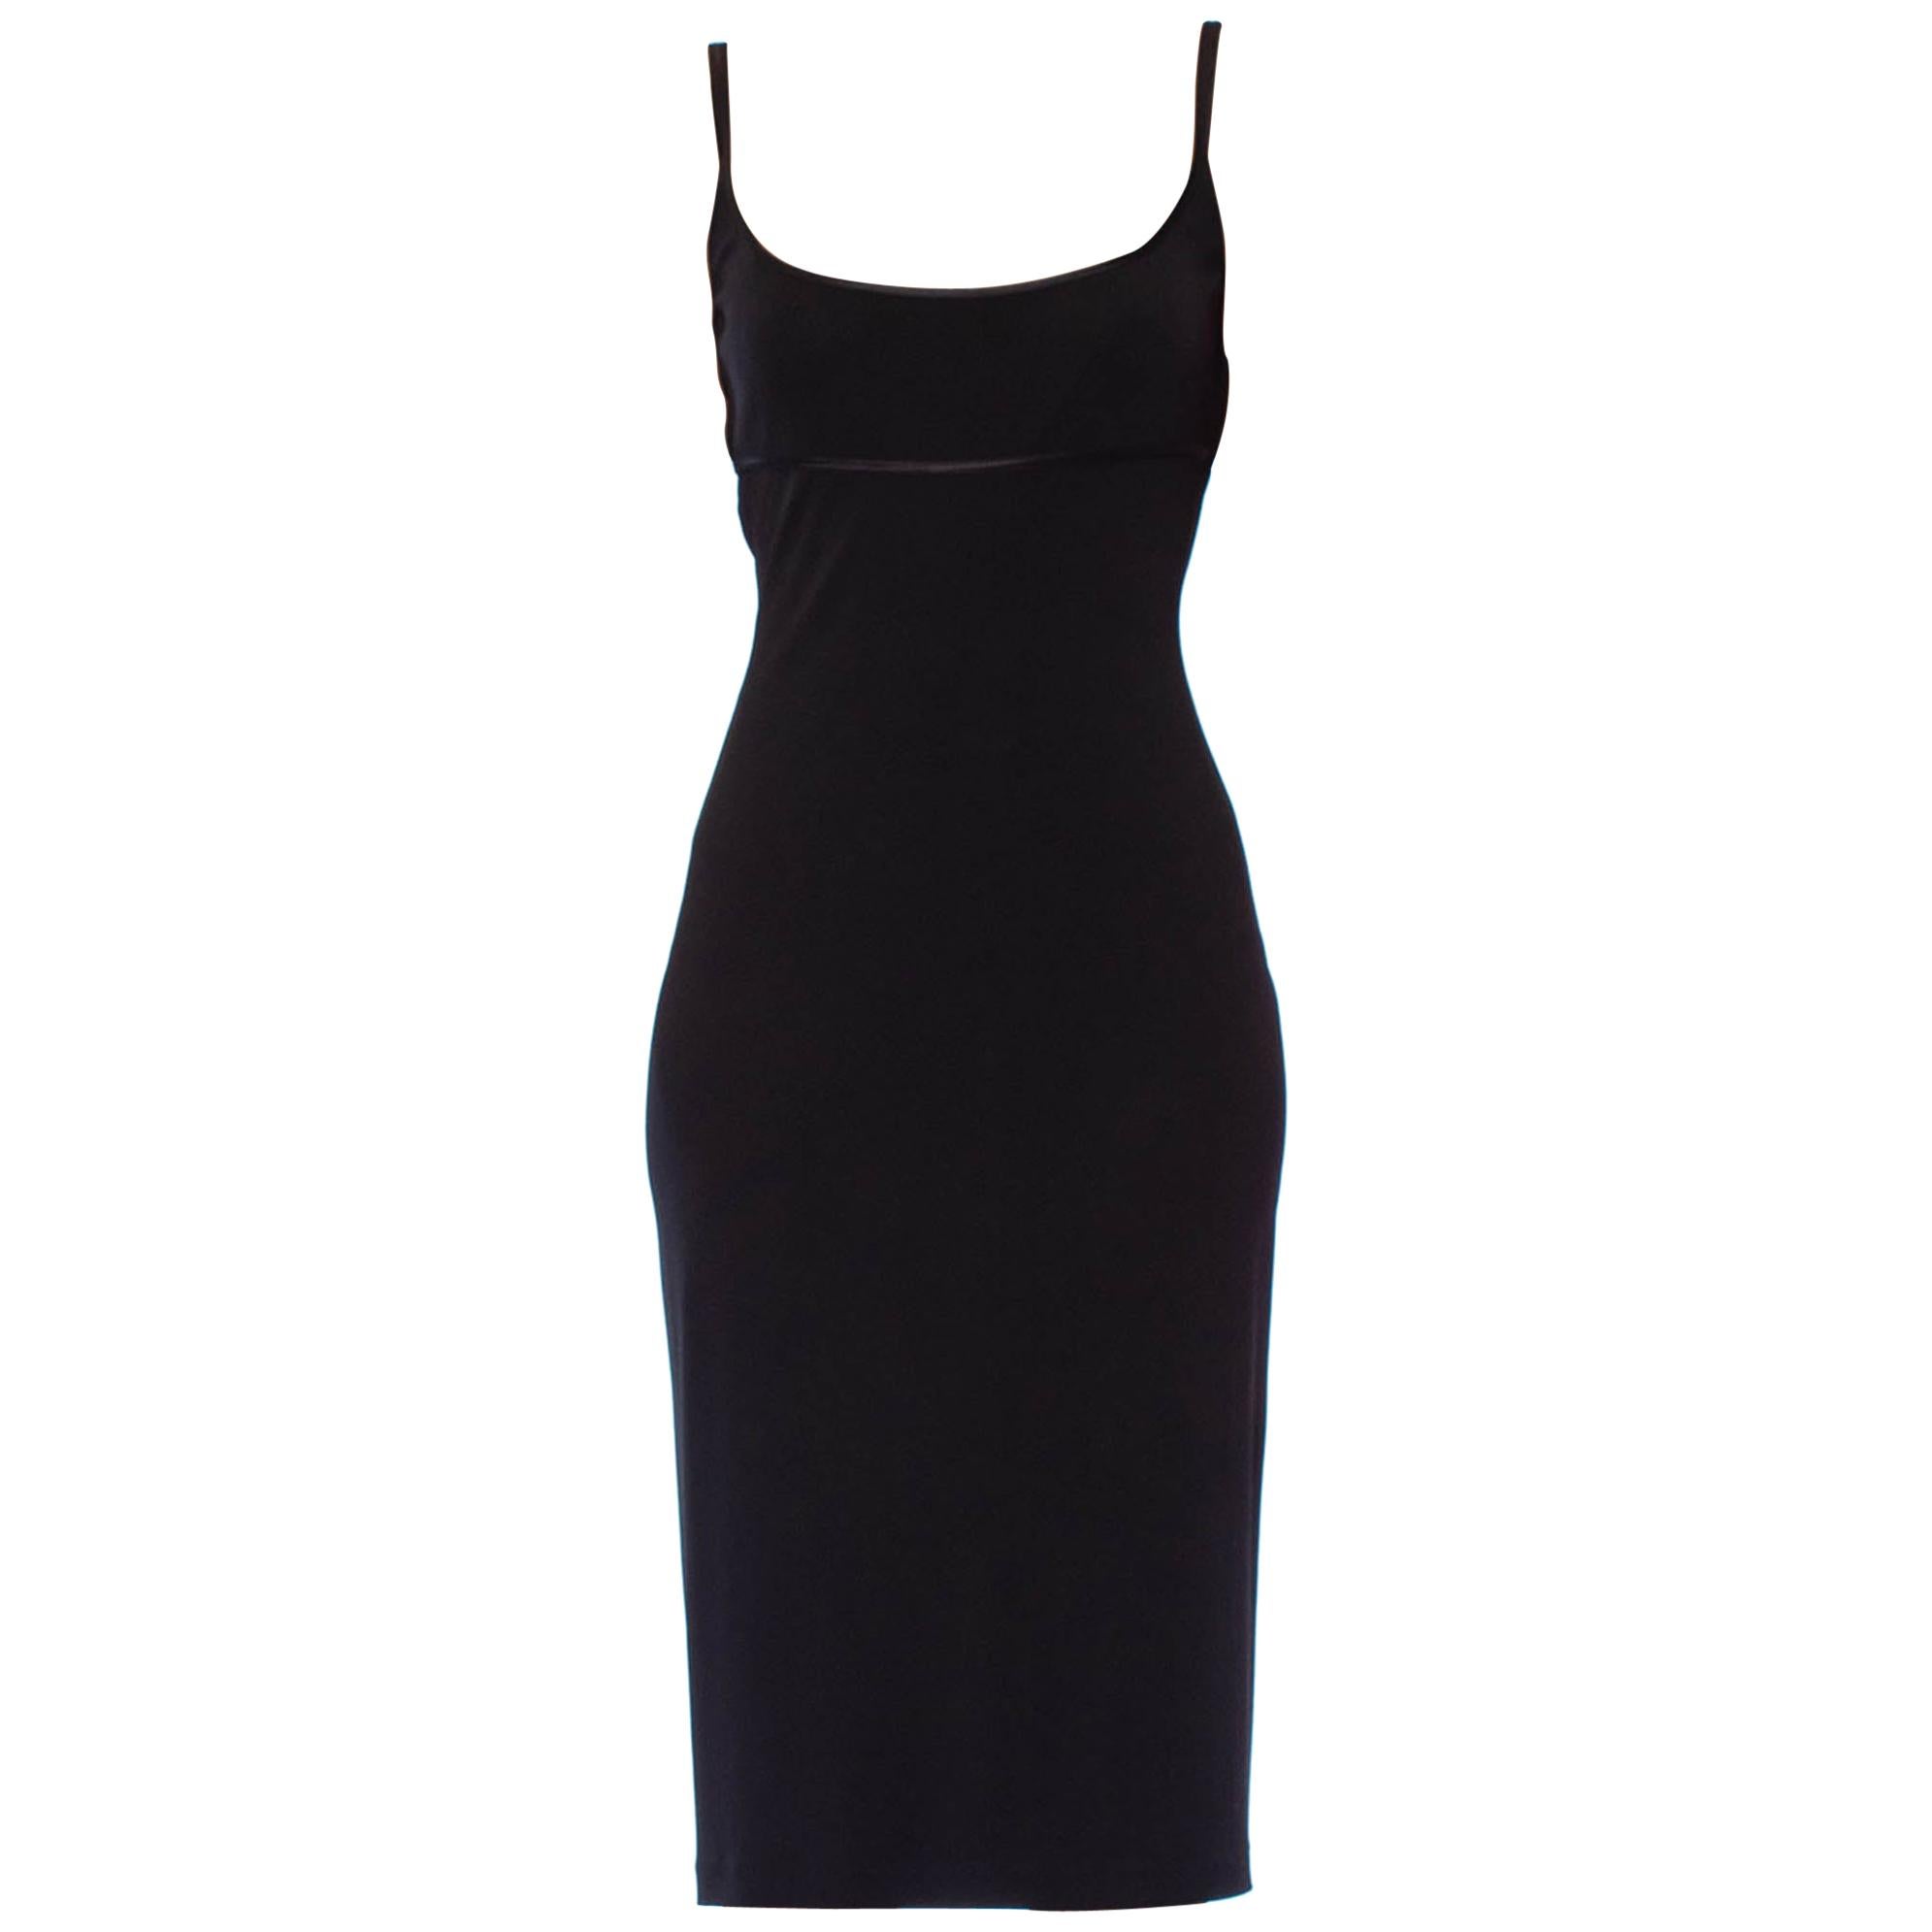 1990S RICHARD TYLER Black Rayon Jersey Open Back Body-Con Cocktail Dress With S